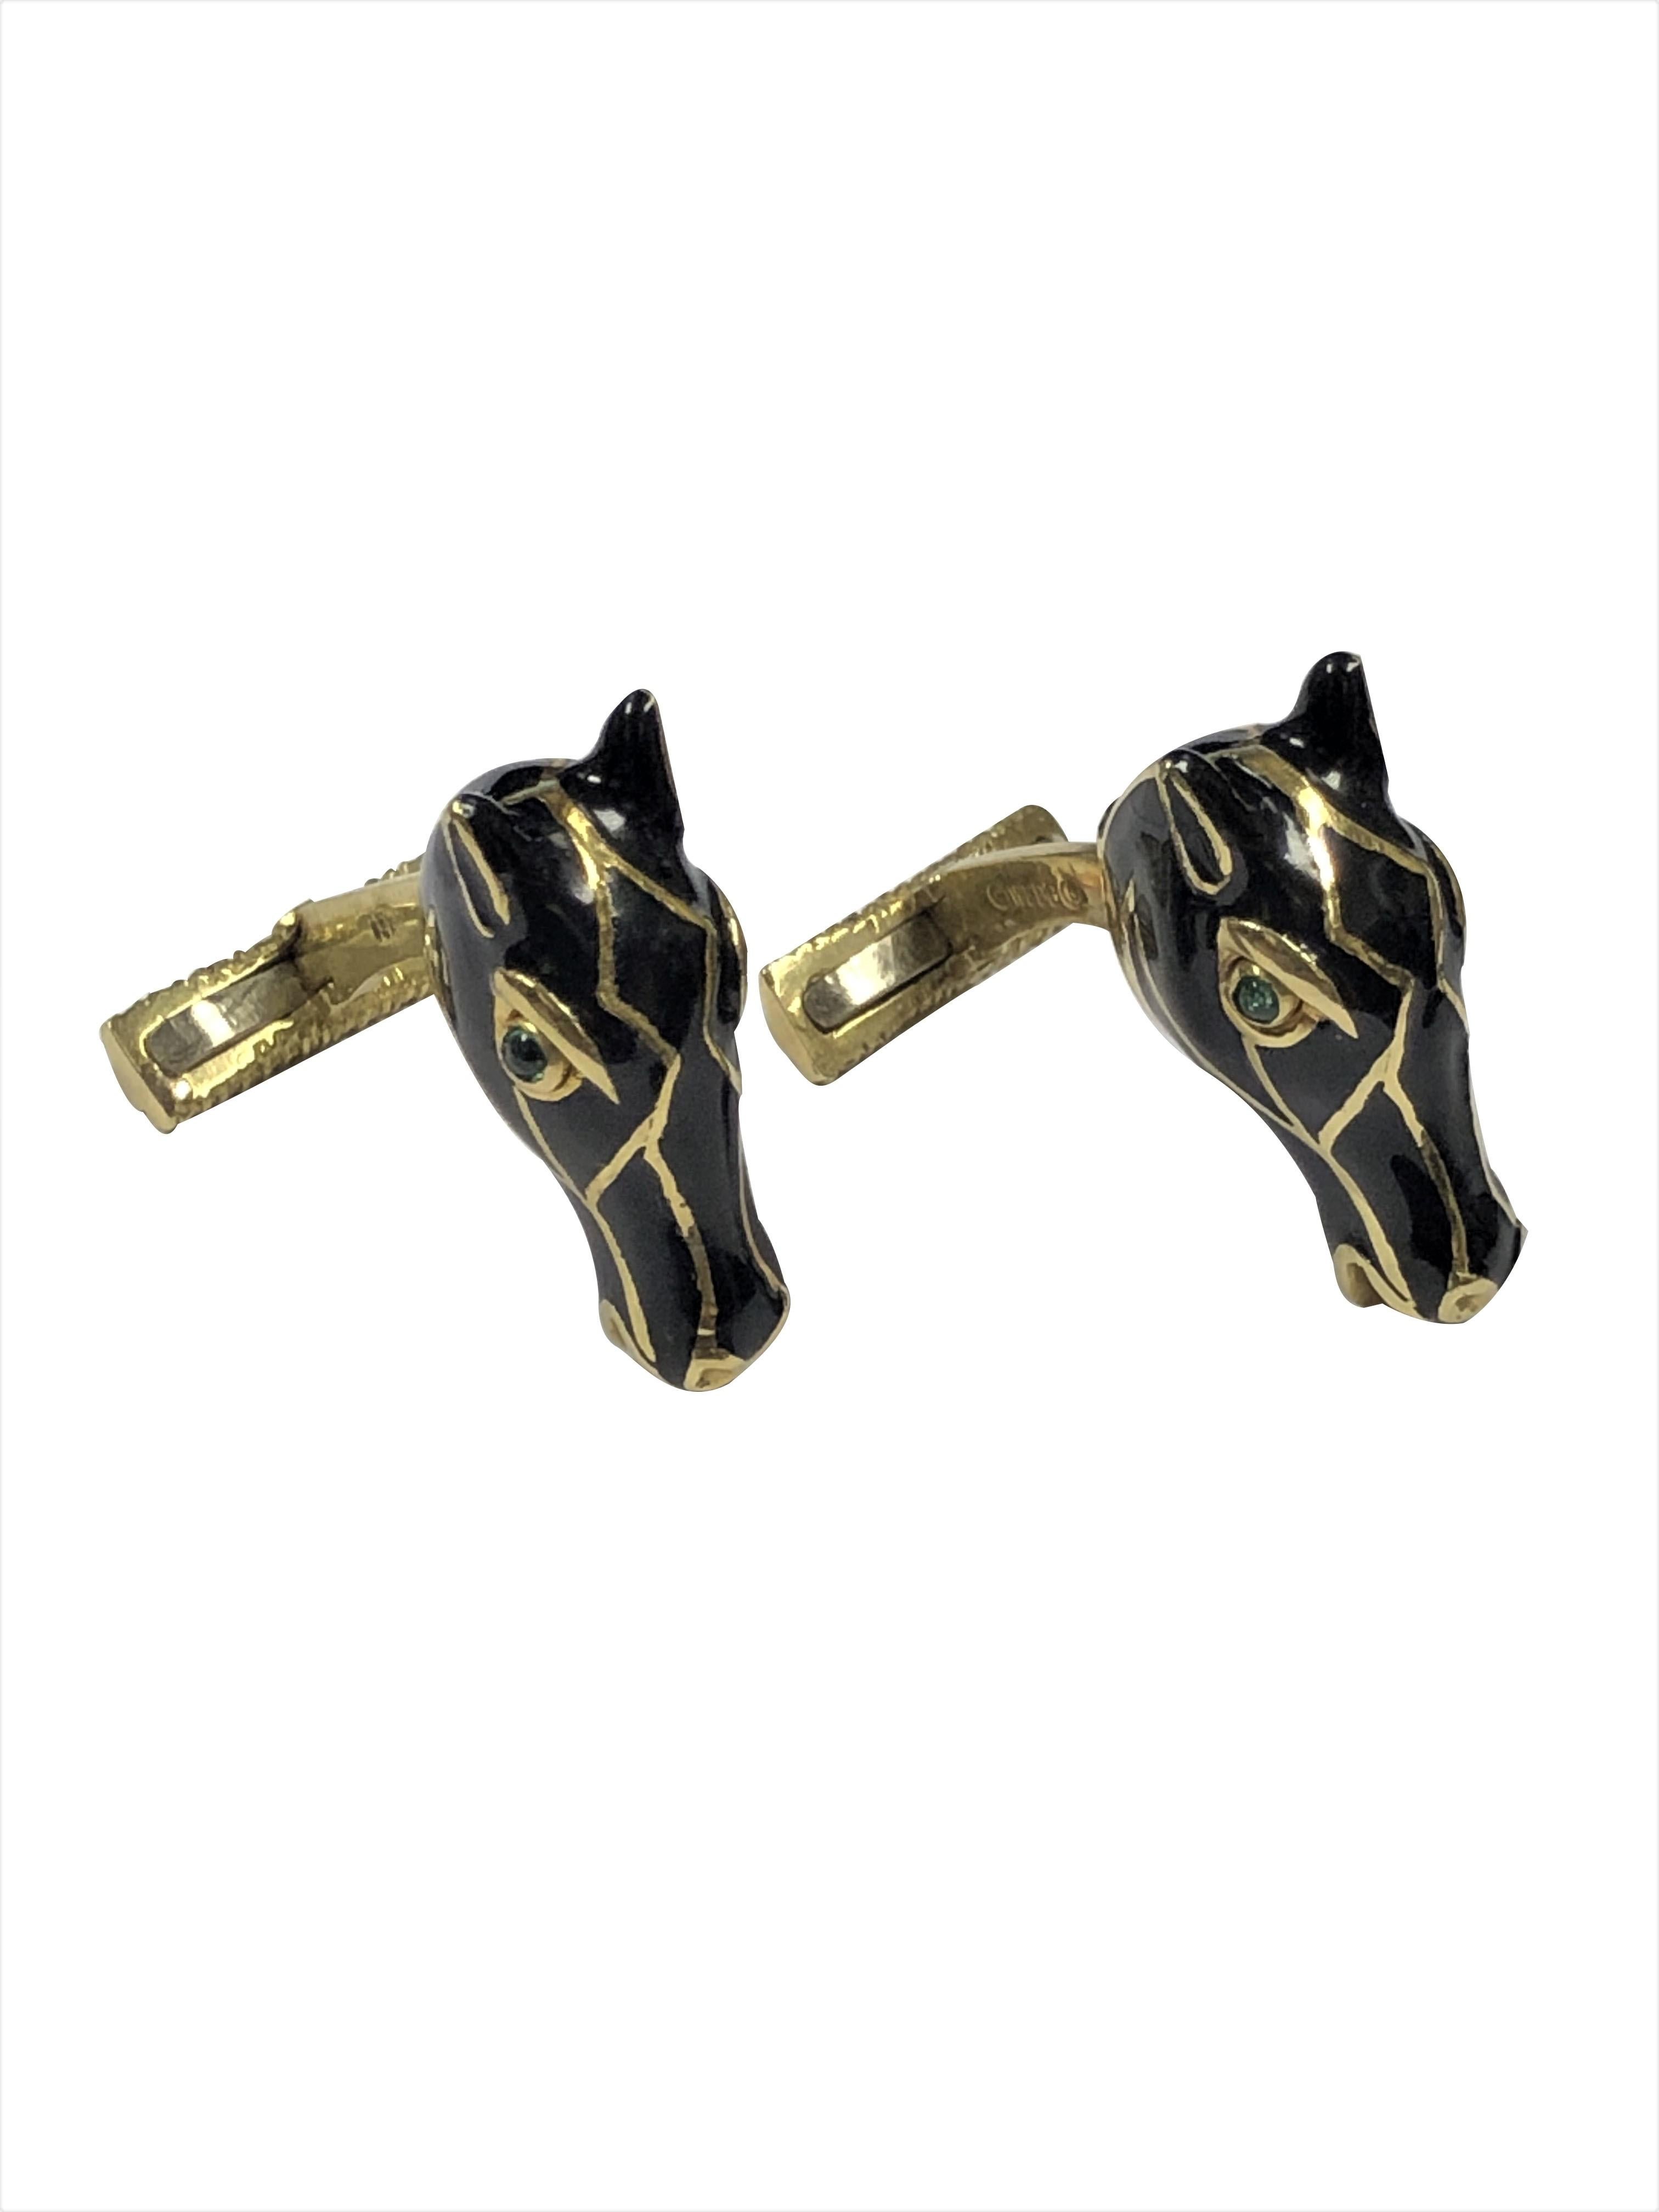 Circa 1990 David Webb 18K Yellow Gold Horse Head Cufflinks, measuring 1 inch in length and 3/8 inch wide, these are solid with a good weight of 27.2 Grams. Nicely detailed in Black enamel and having Cabochon Emerald Eyes. Lever backs for easy on and